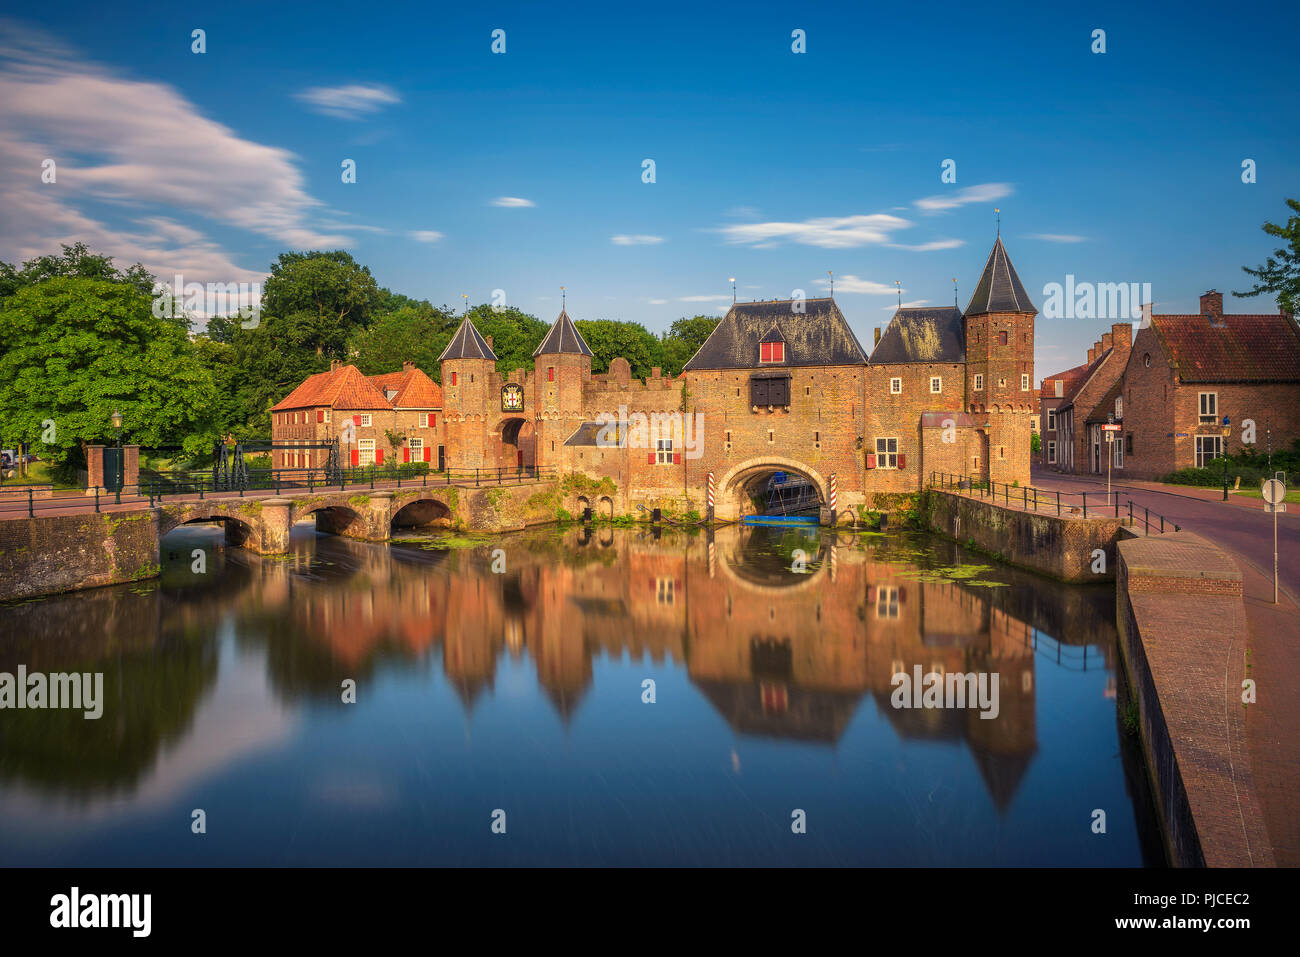 Medieval town gate in Amersfoort, Netherlands Stock Photo